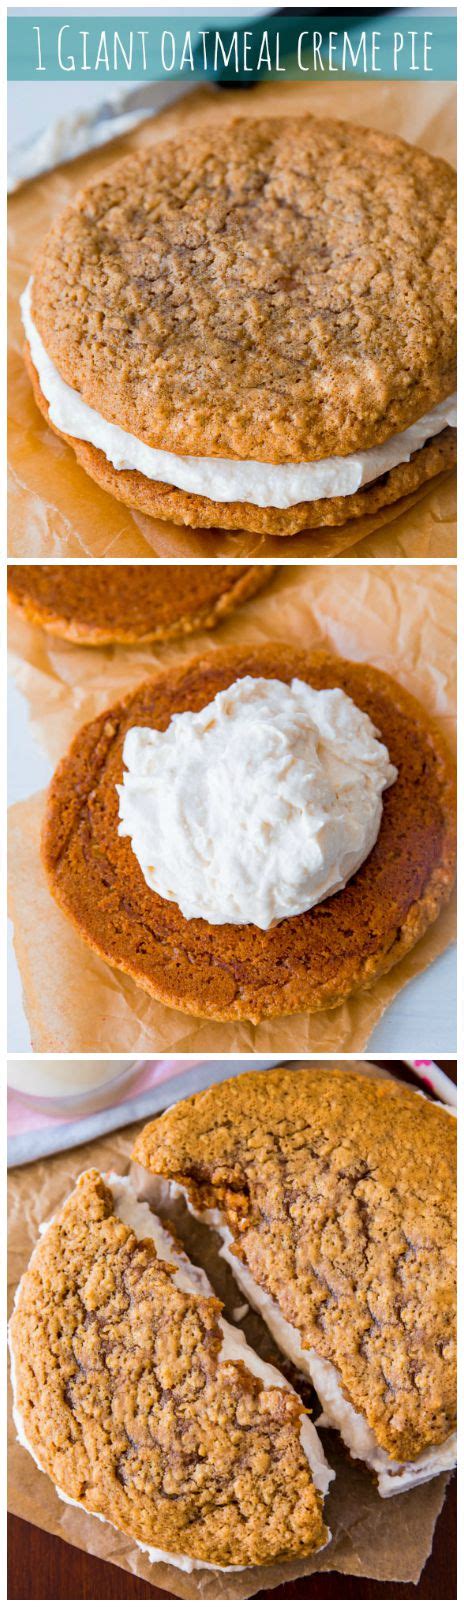 I found this recipe and it's the closest i've come to them. 1 Giant Oatmeal Creme Pie - Sallys Baking Addiction